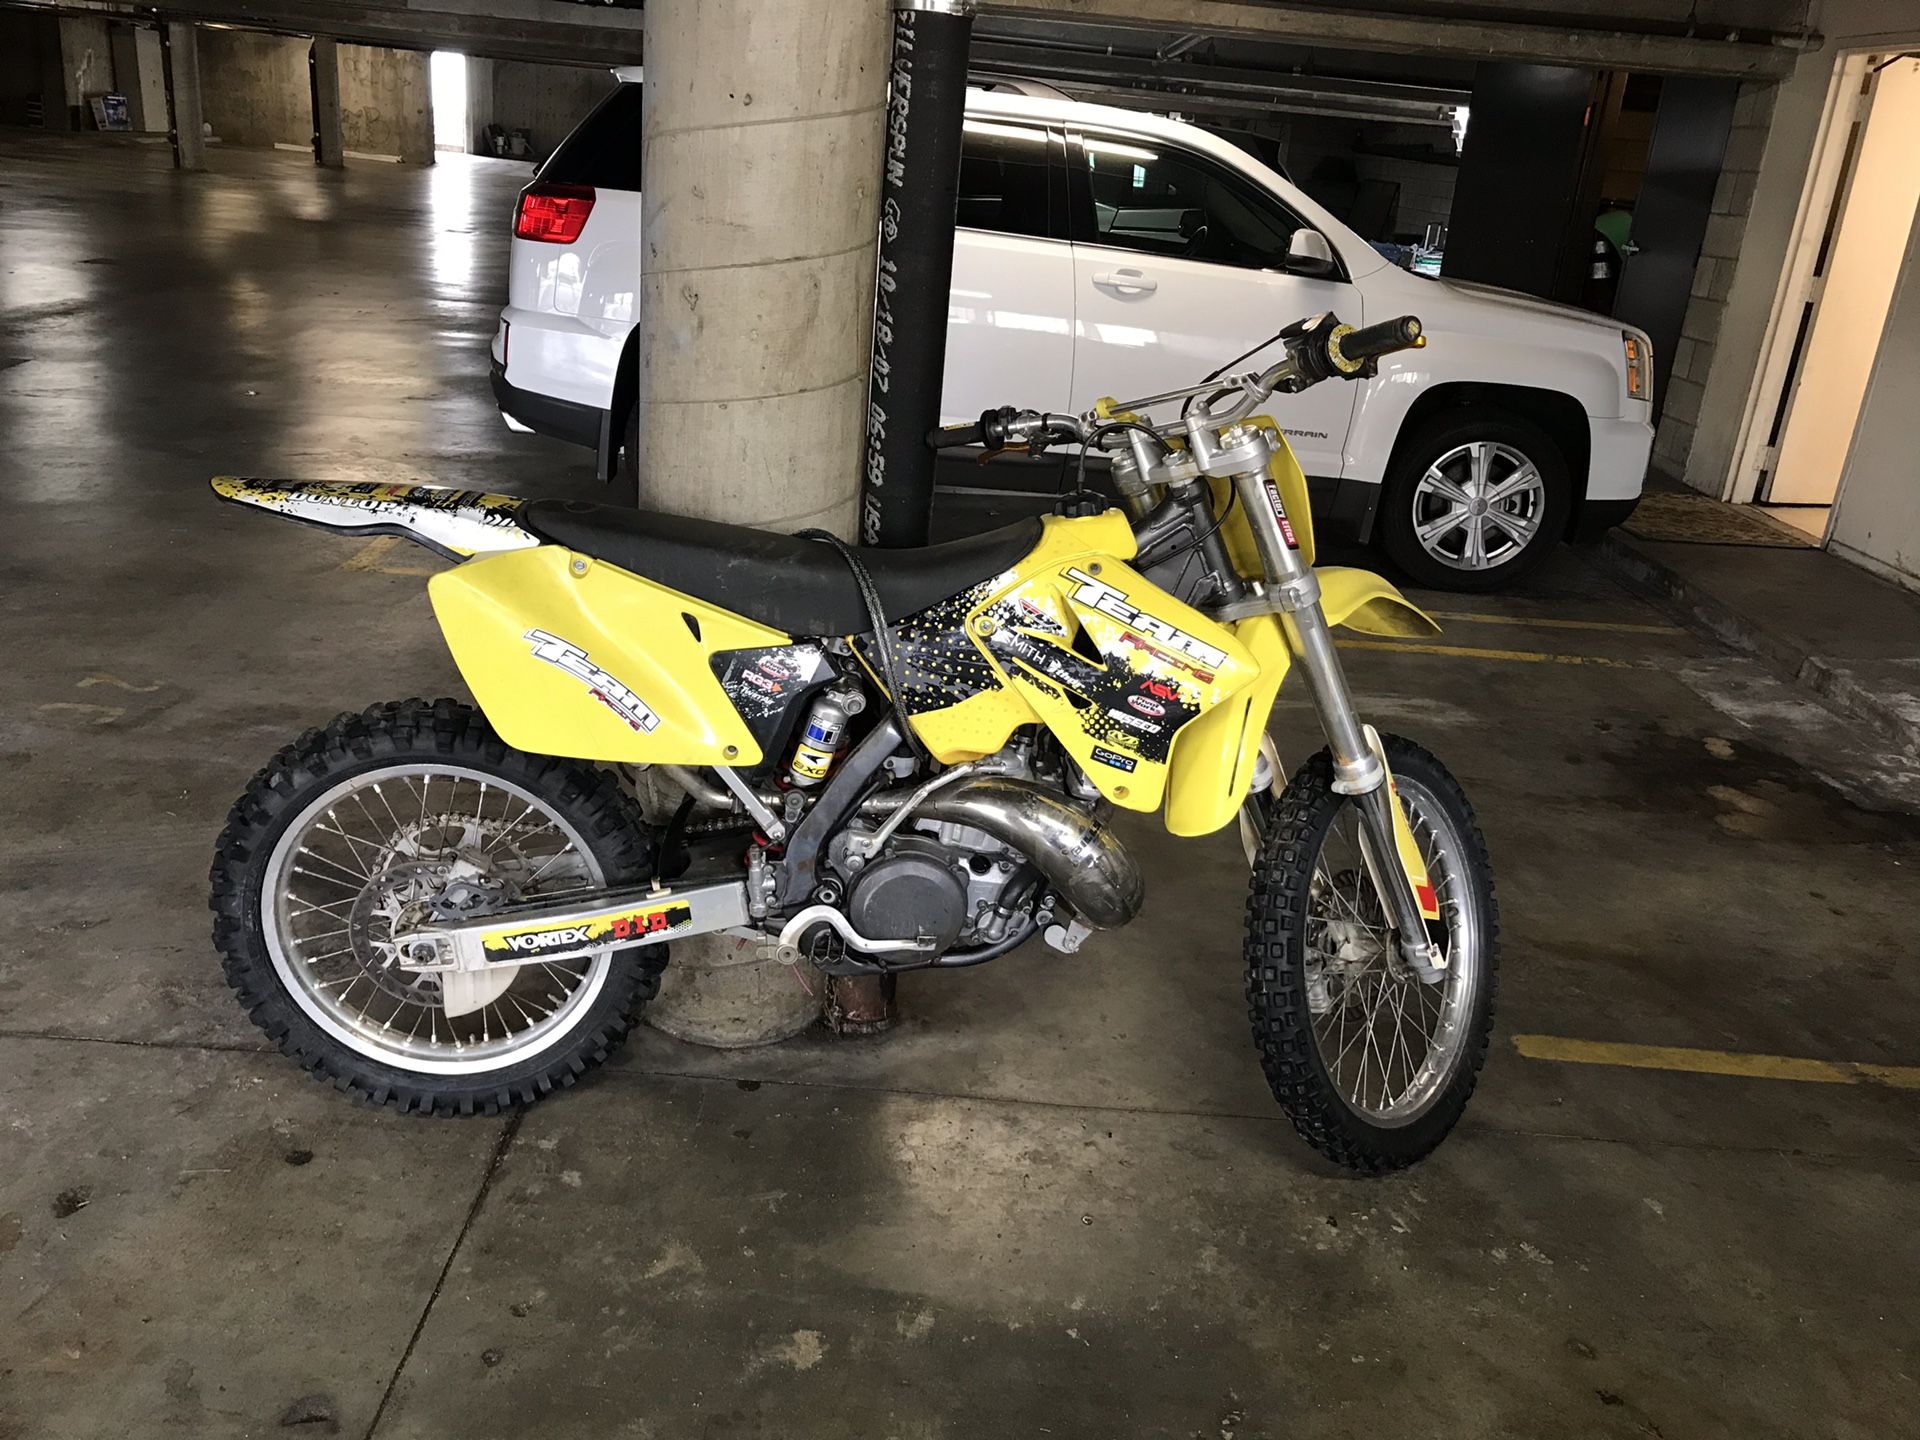 Suzuki rm(contact info removed) dirtbike 1 Owner